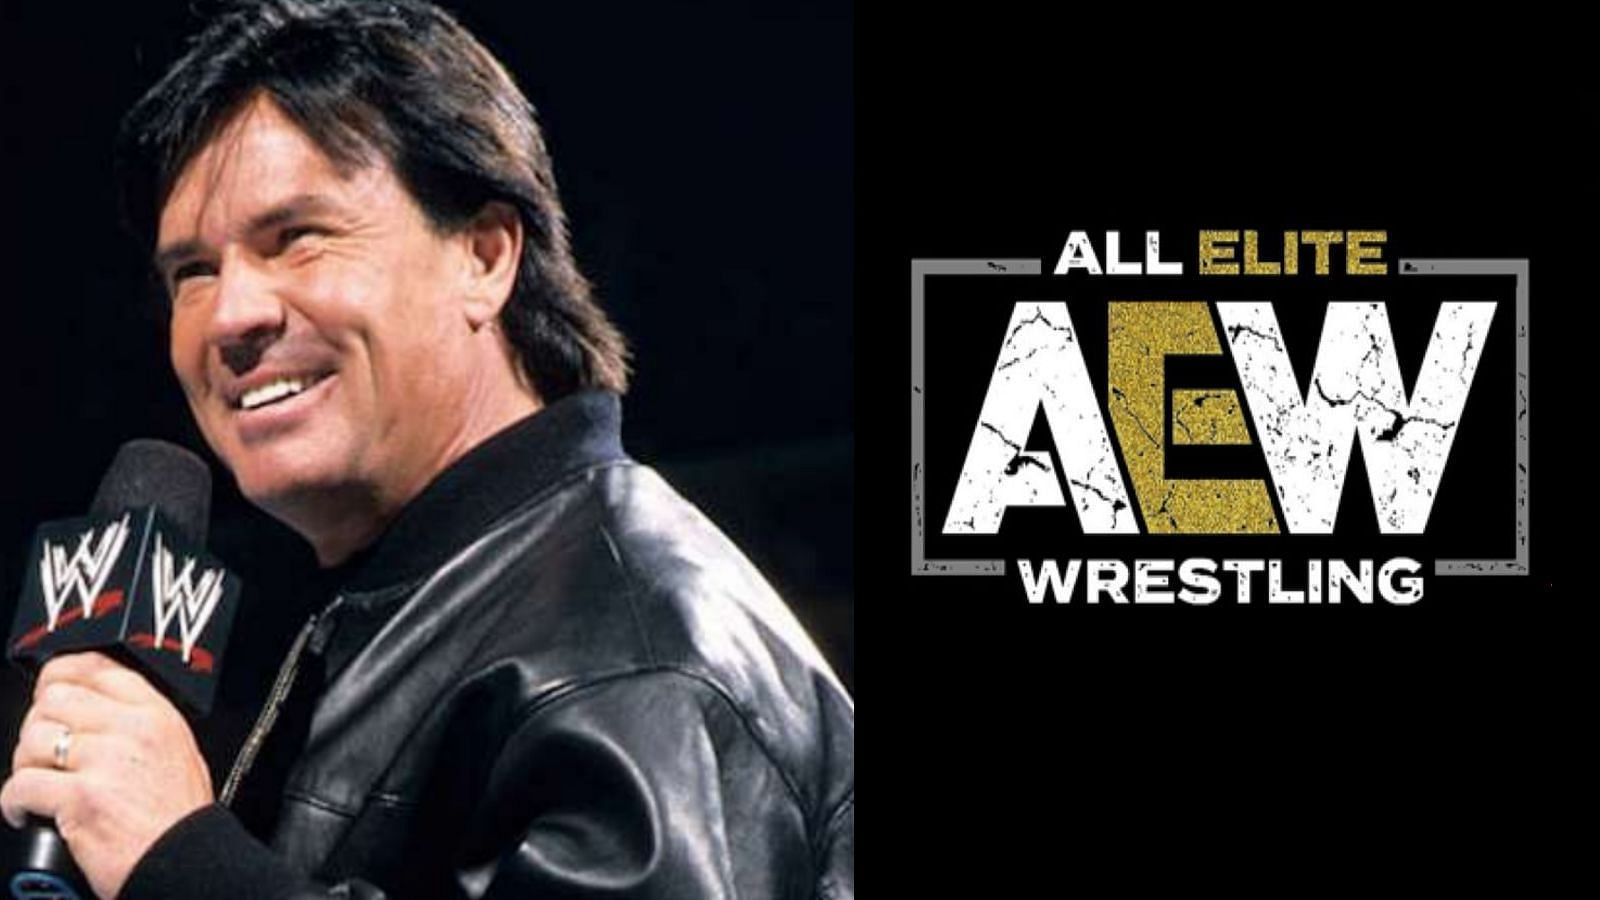 Has Bischoff noticed a crucial mistake AEW has made?